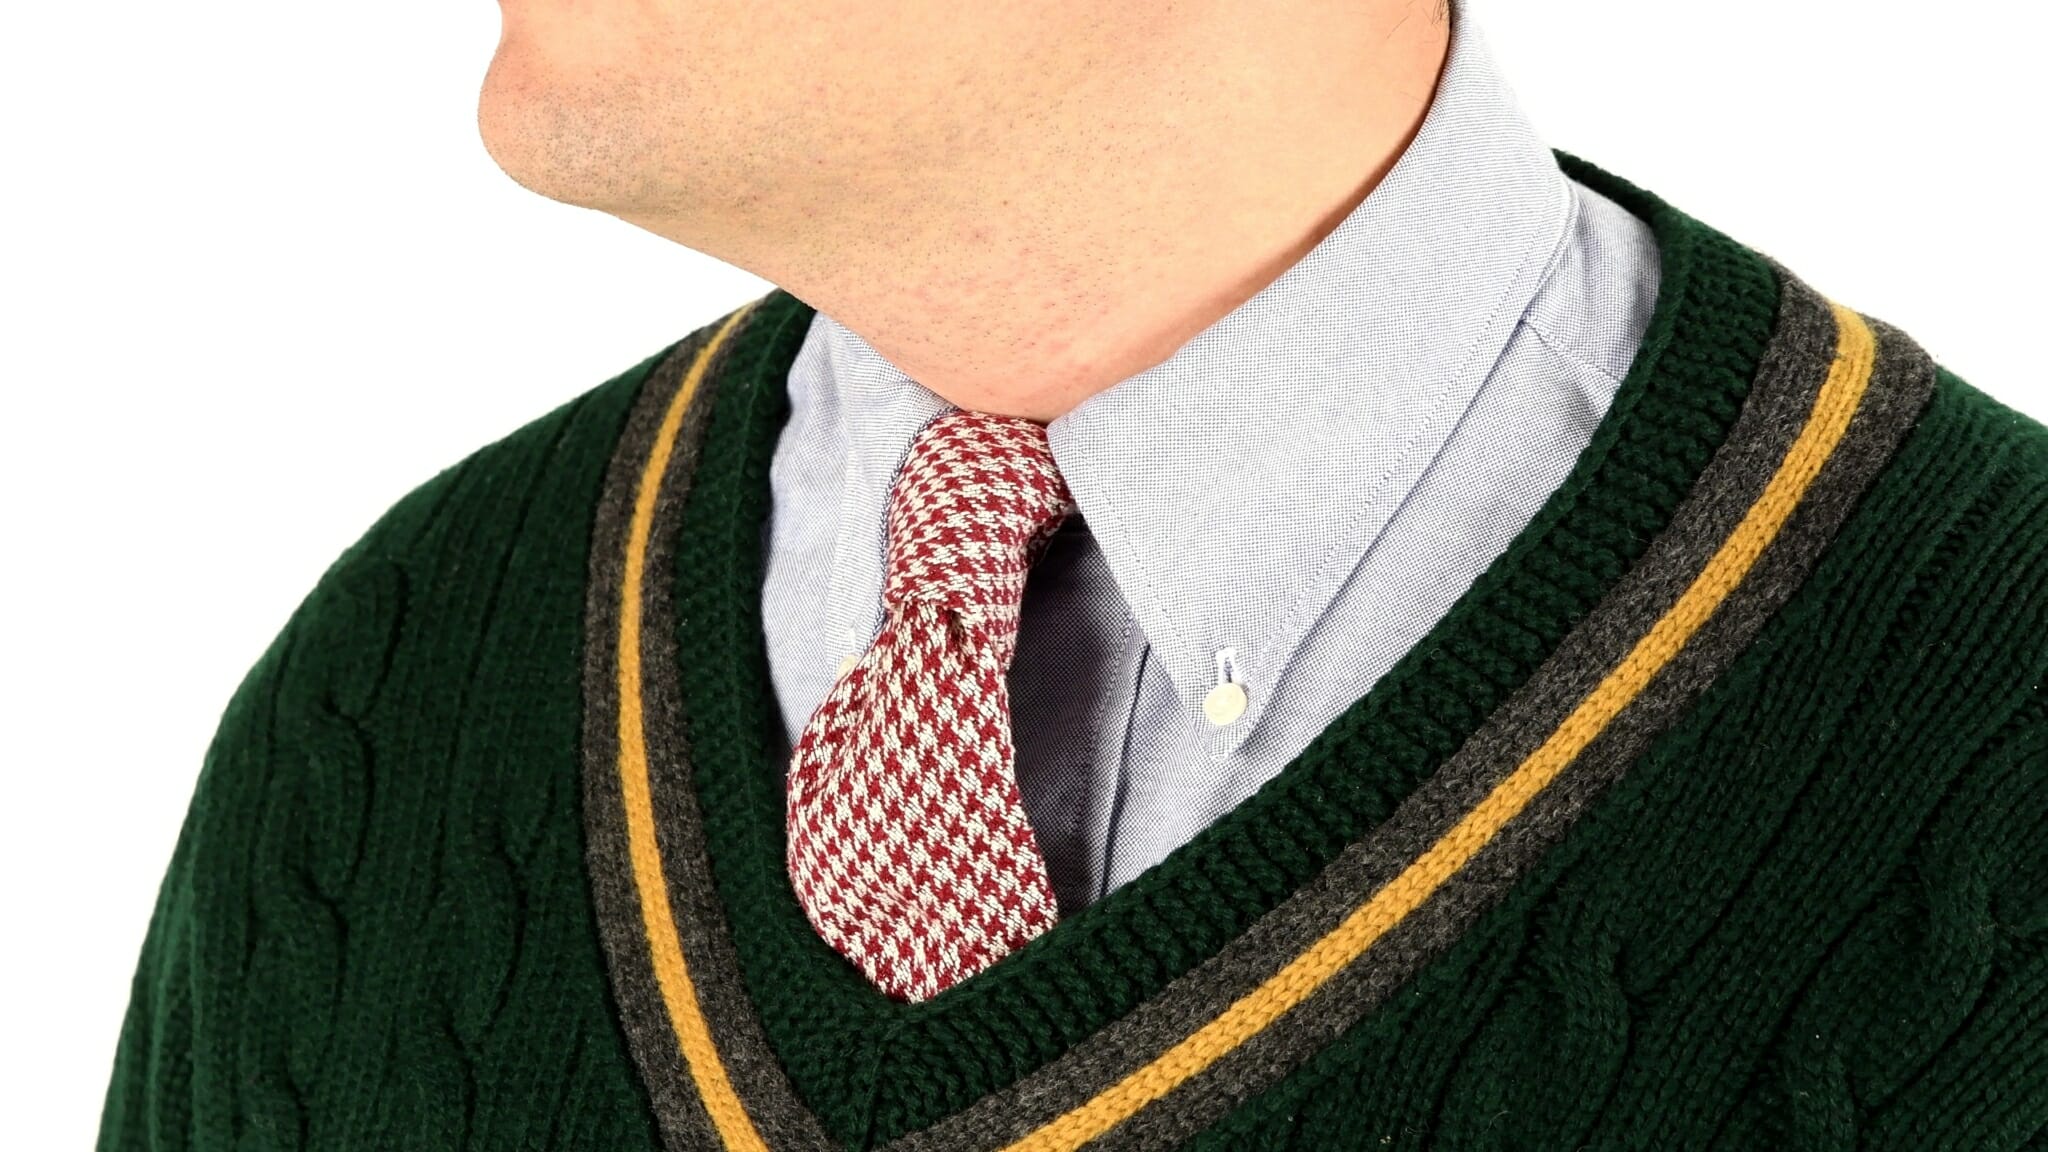 OCBD collar shirt with a green tennis sweater and a houndstooth tie